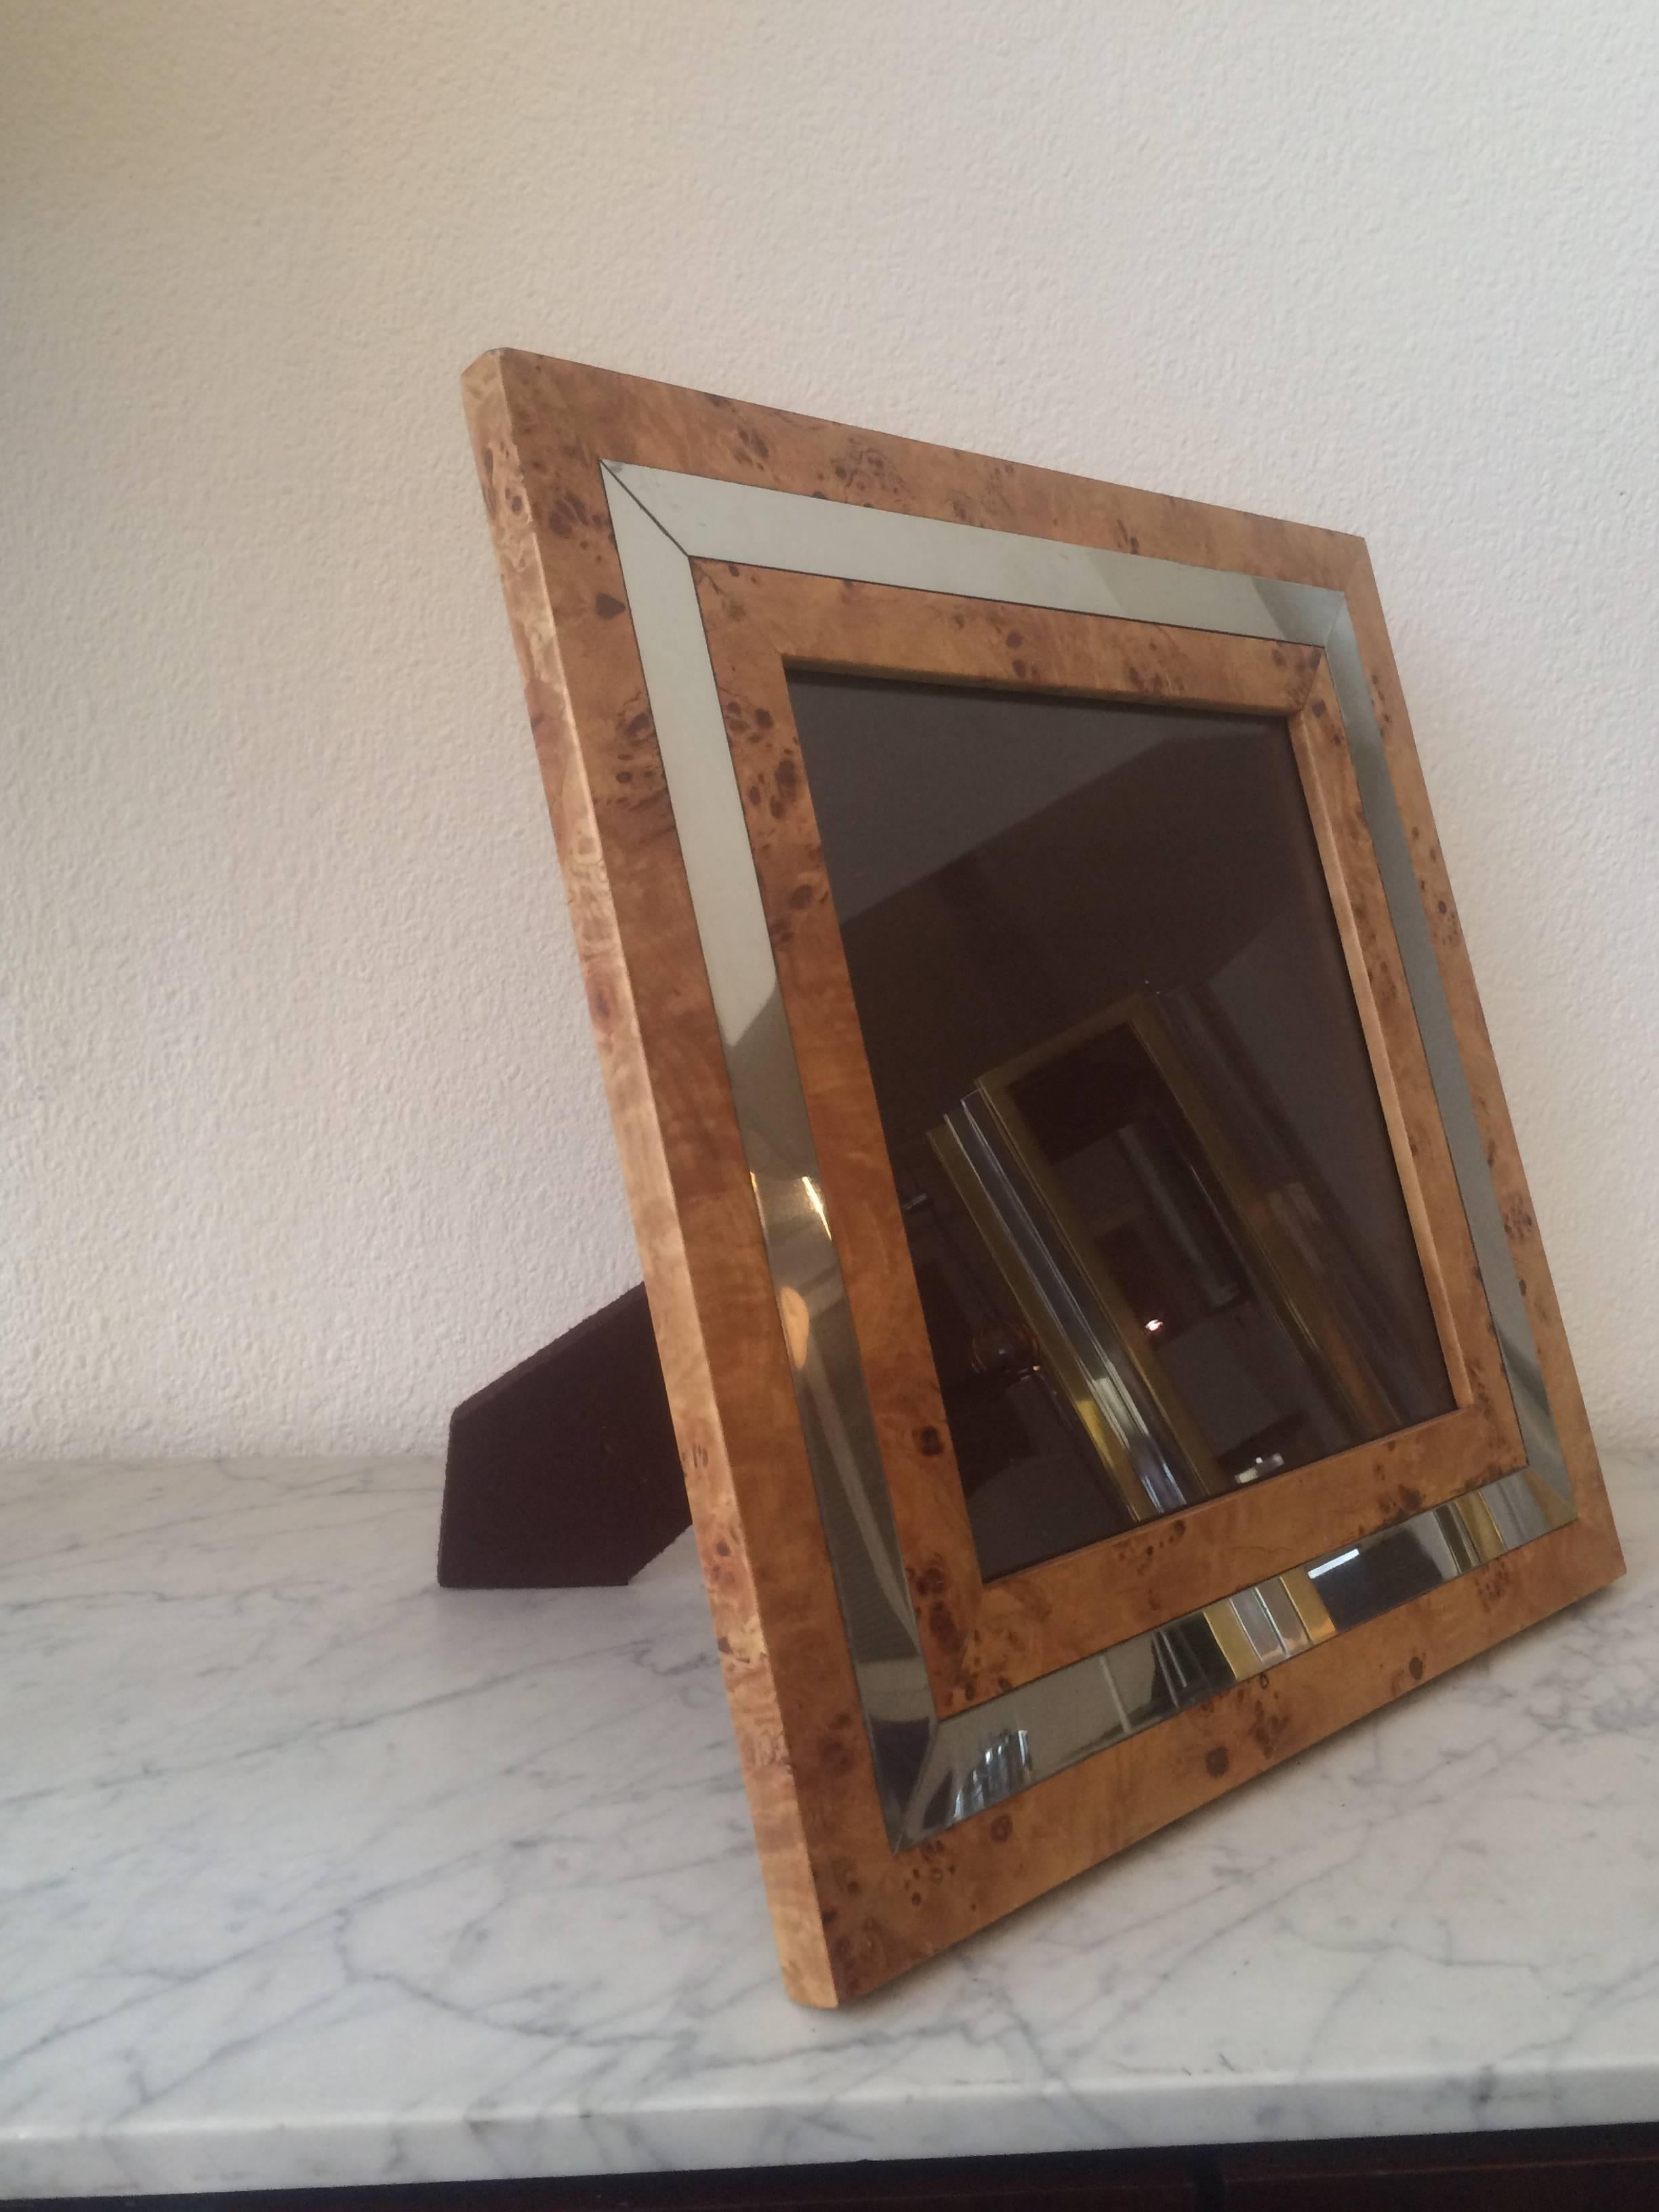 1970s burl wood and chrome picture frame.
   